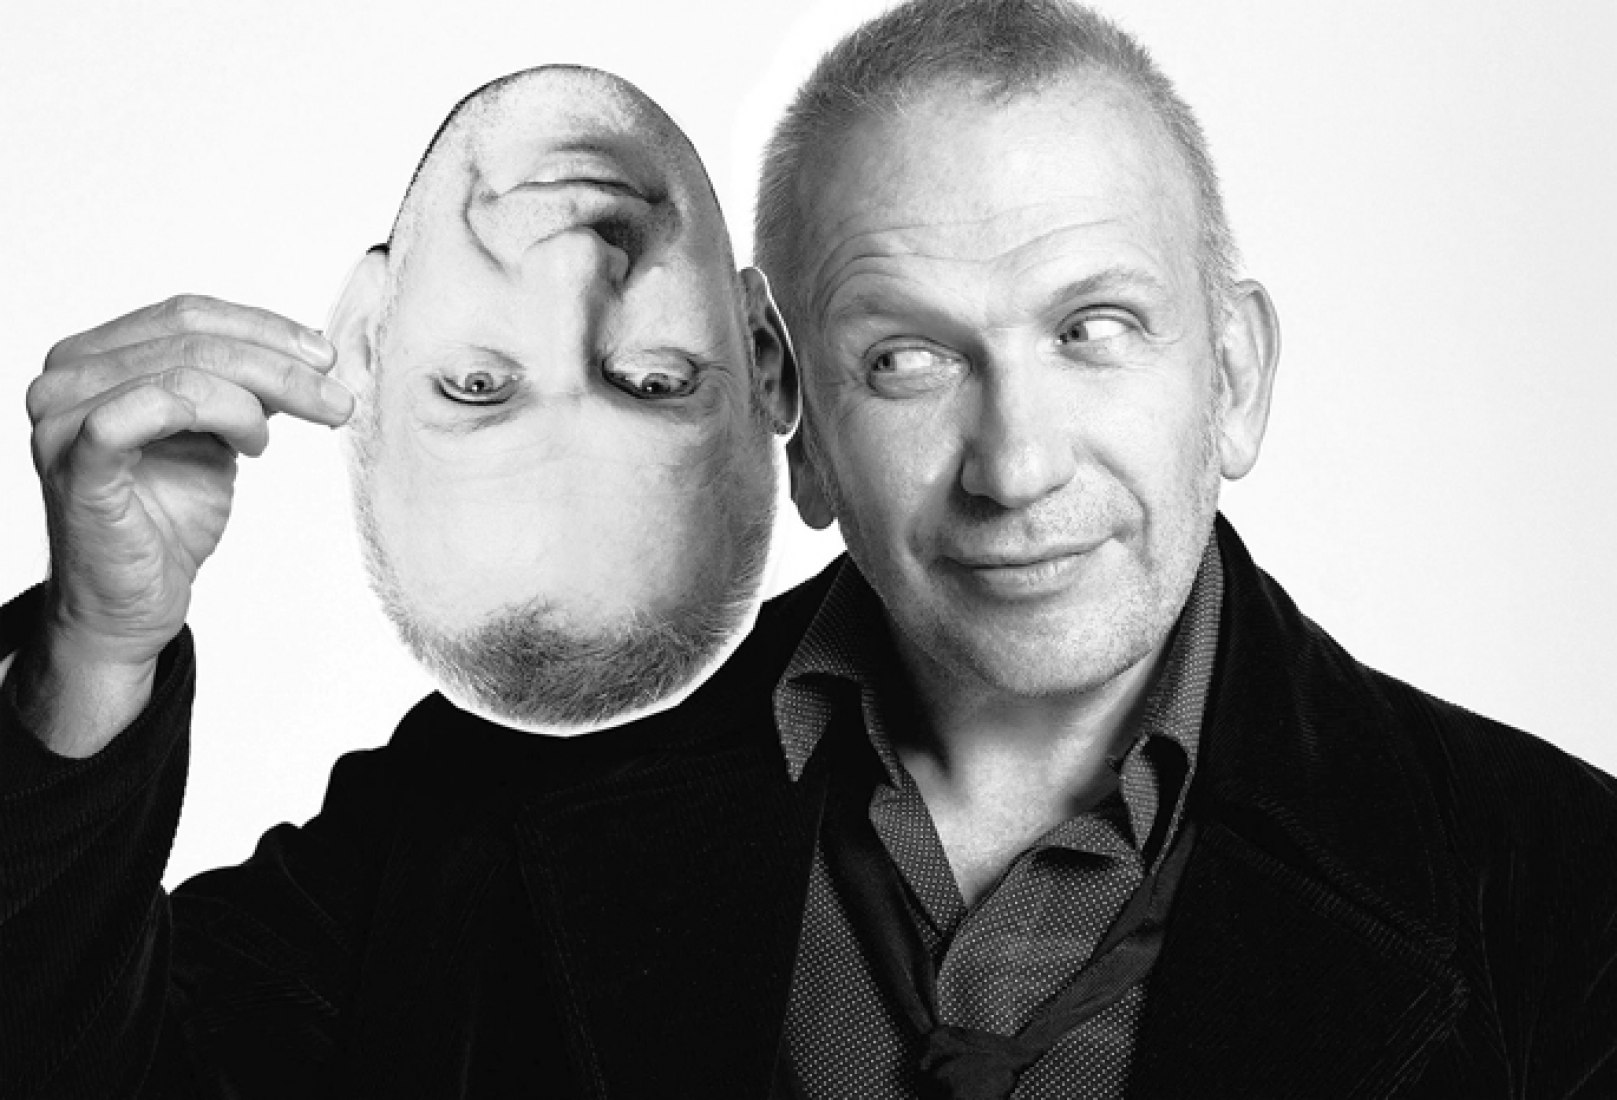 JEAN PAUL GAULTIER. The Fashion World of Jean Paul Gaultier: From the Sidewalk to the Catwalk